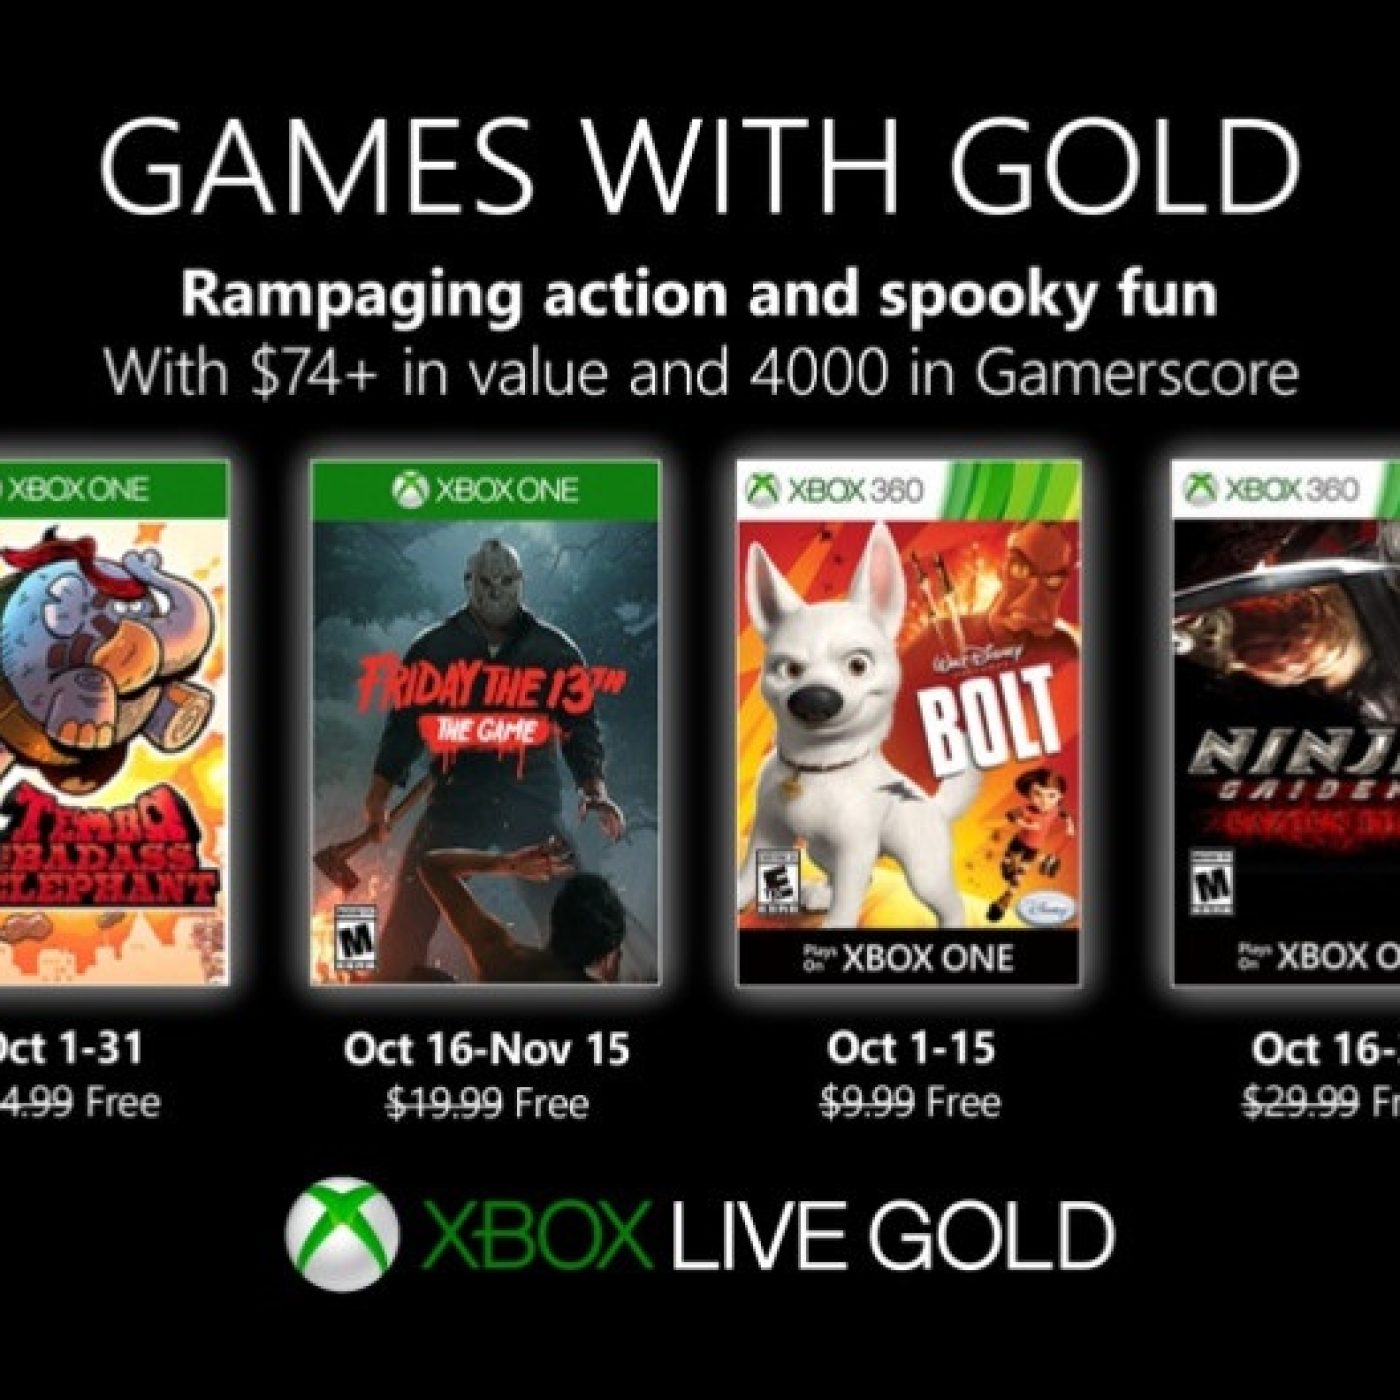 Games with Gold ditching Xbox 360 titles in October